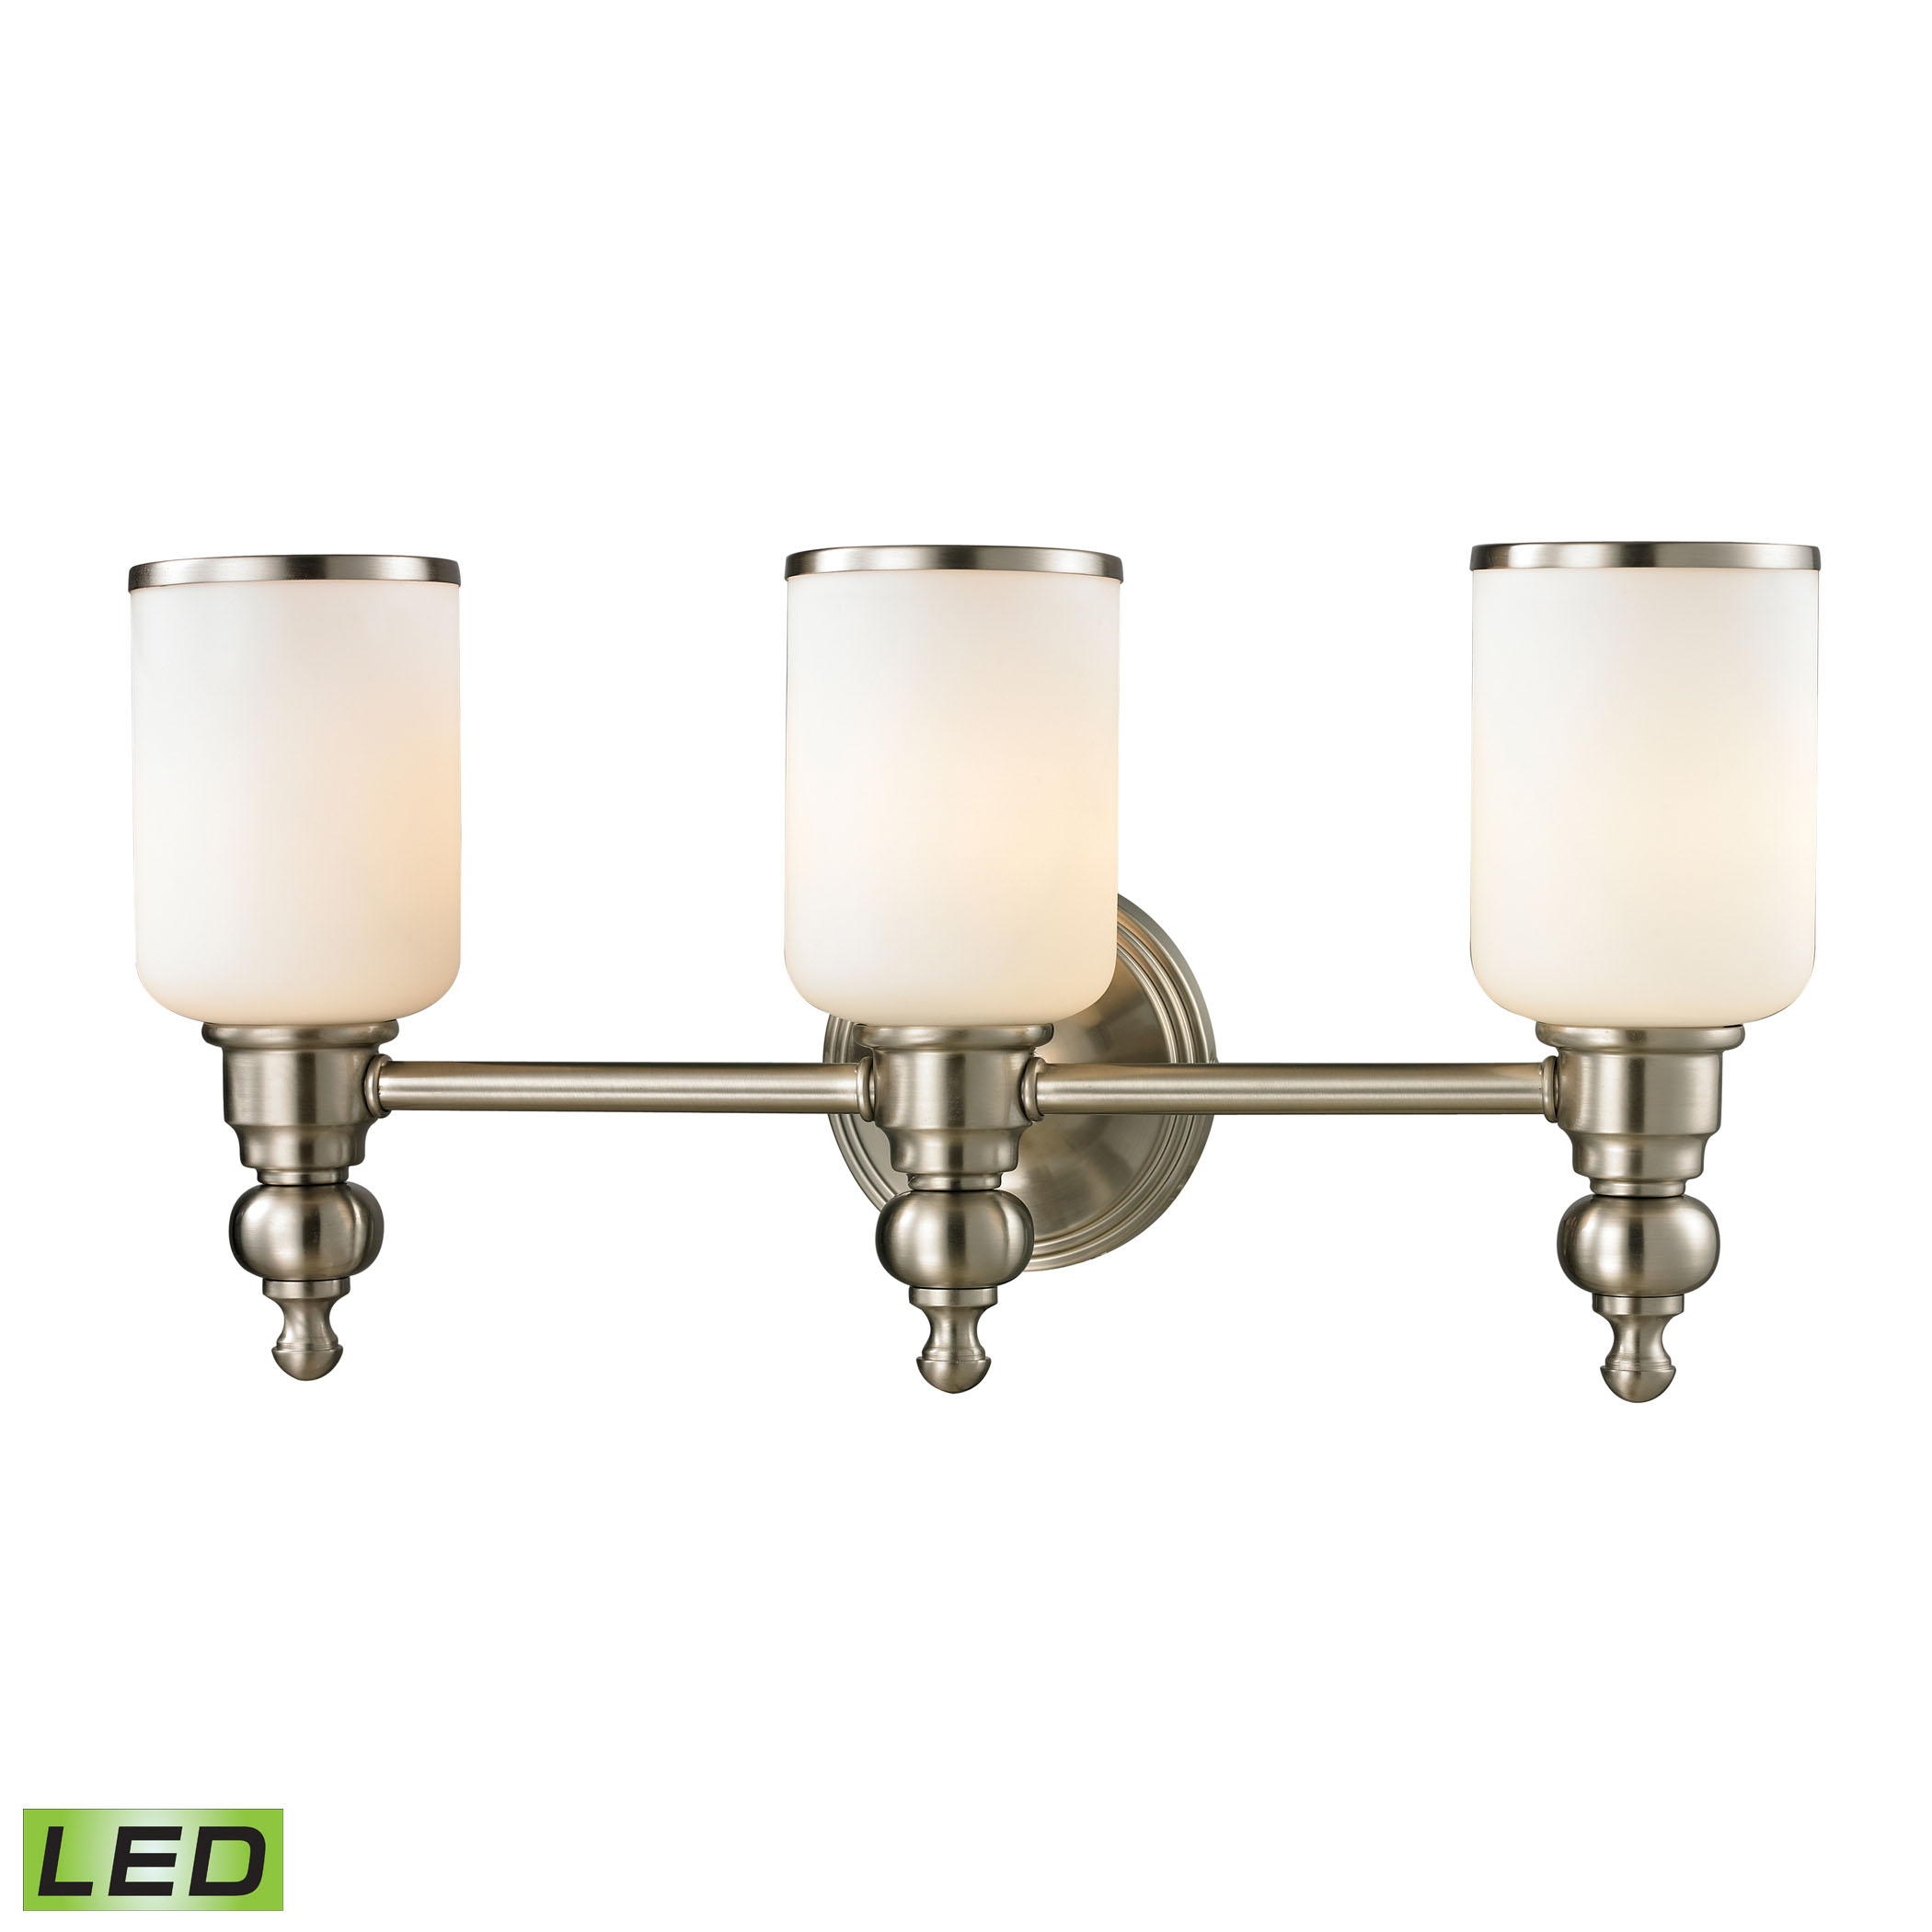 Bristol Collection 3 light bath in Brushed Nickel - LED, 800 Lumens (2400 Lumens Total) with Full Sc